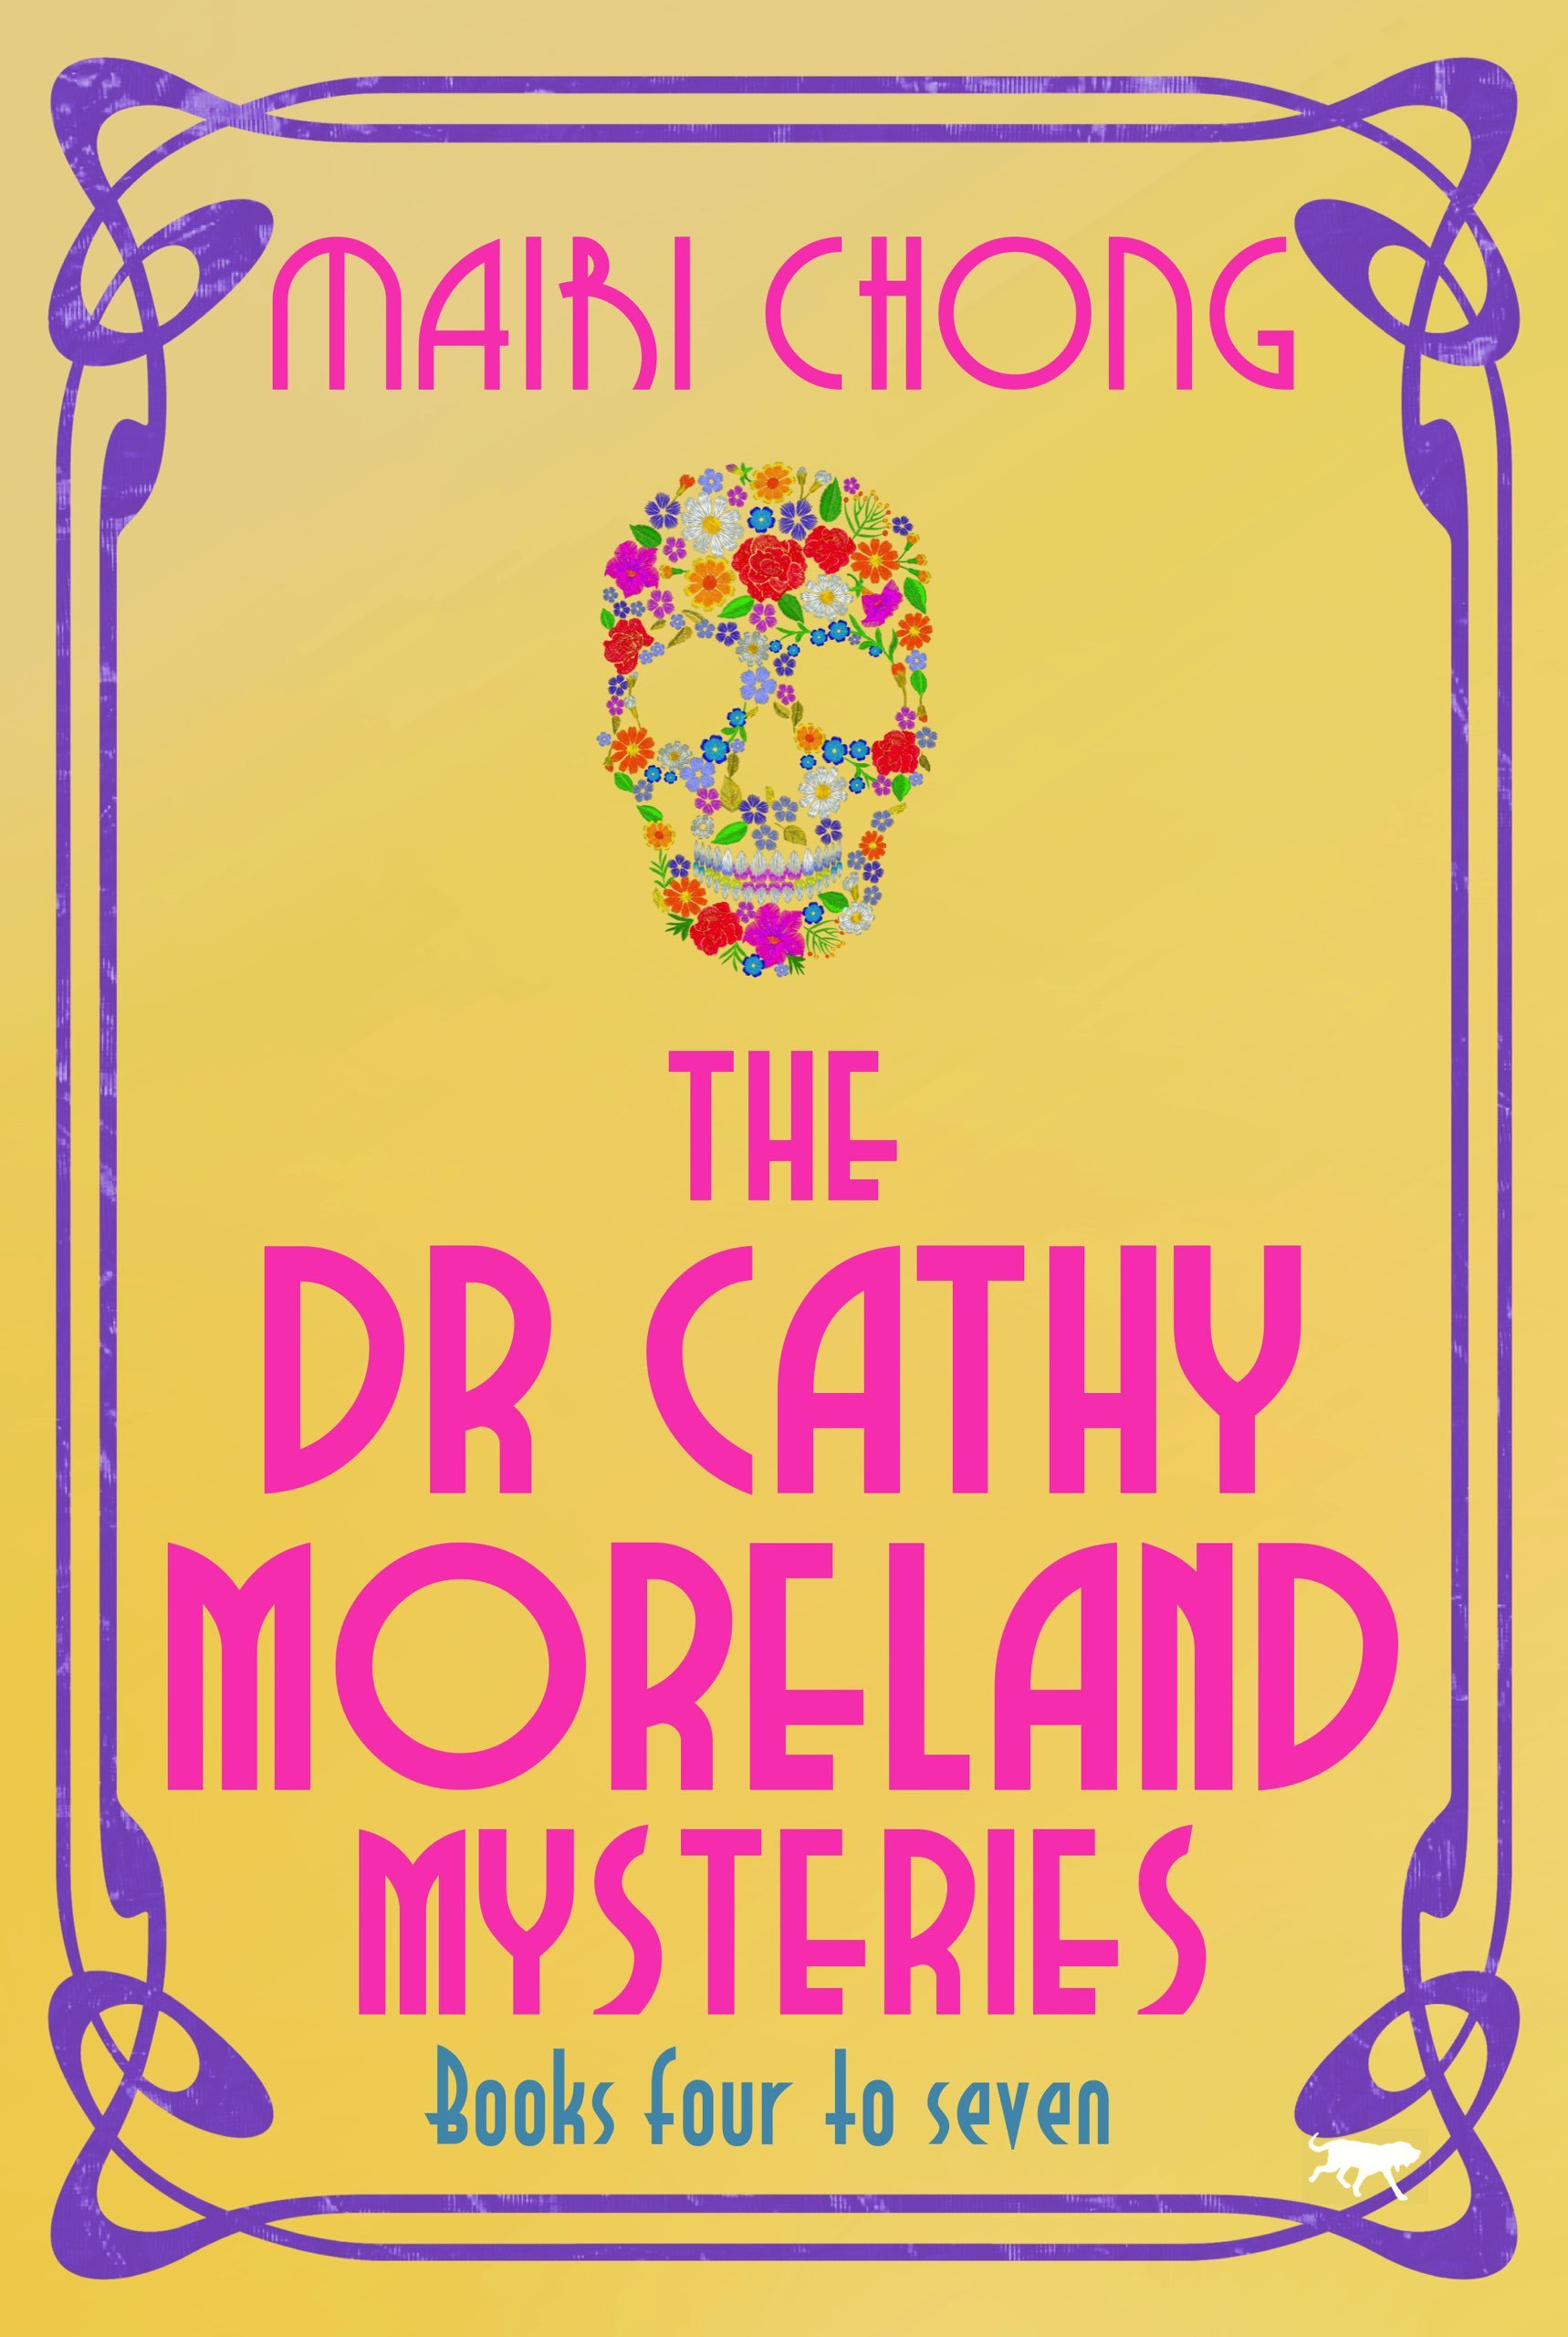 The-Dr-Cathy-Moreland-Mysteries-Generic.jpg